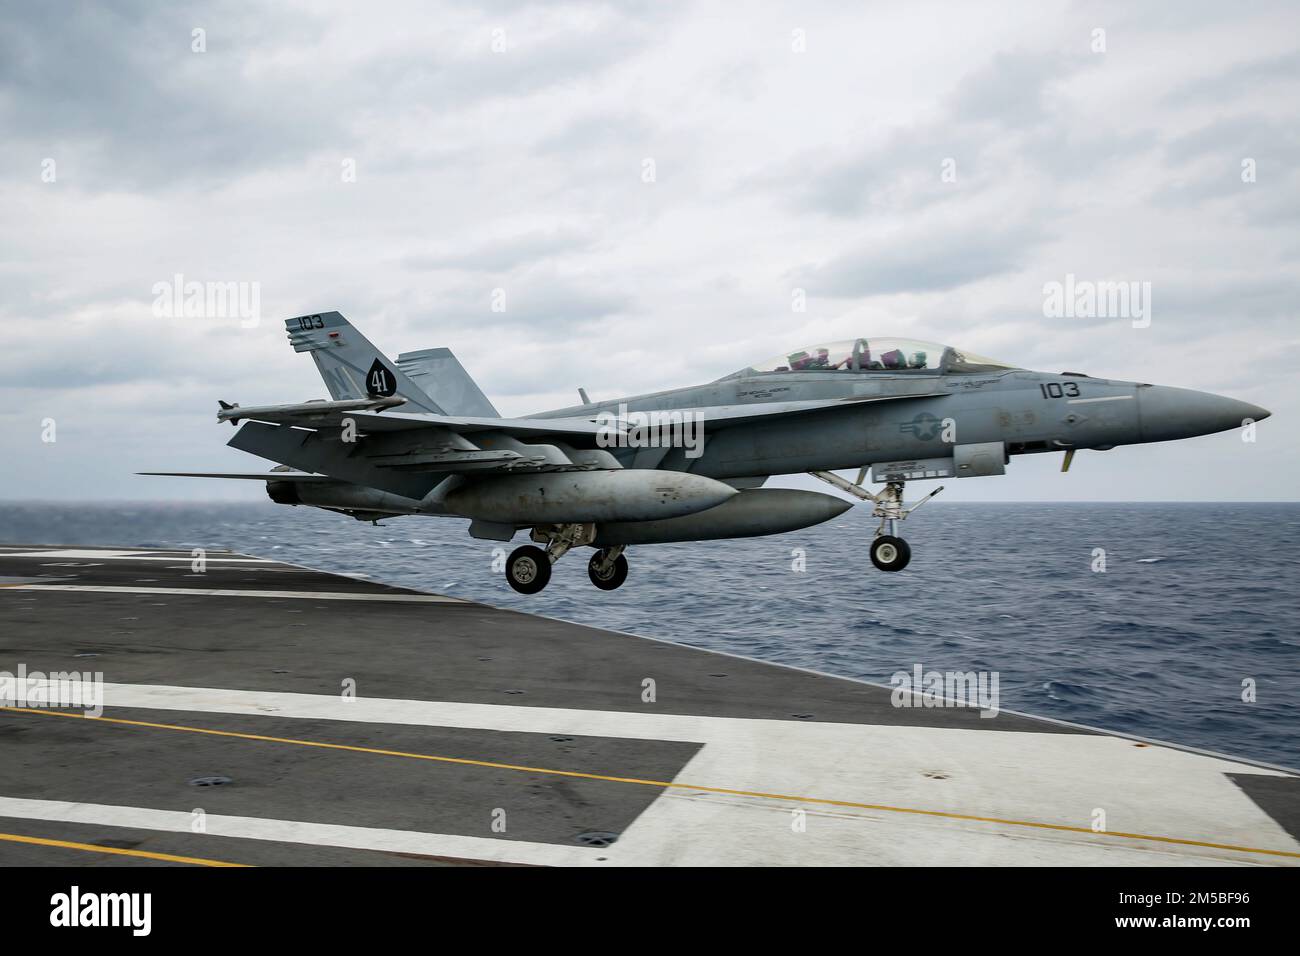 PHILIPPINE SEA (Feb. 22, 2022) An F/A-18F Super Hornet, assigned to the 'Black Aces' of Strike Fighter Squadron (VFA) 41, launches from the flight deck of the Nimitz-class aircraft carrier USS Abraham Lincoln (CVN 72). Abraham Lincoln Strike Group is on a scheduled deployment in the U.S. 7th Fleet area of operations to enhance interoperability through alliances and partnerships while serving as a ready-response force in support of a free and open Indo-Pacific region. Stock Photo